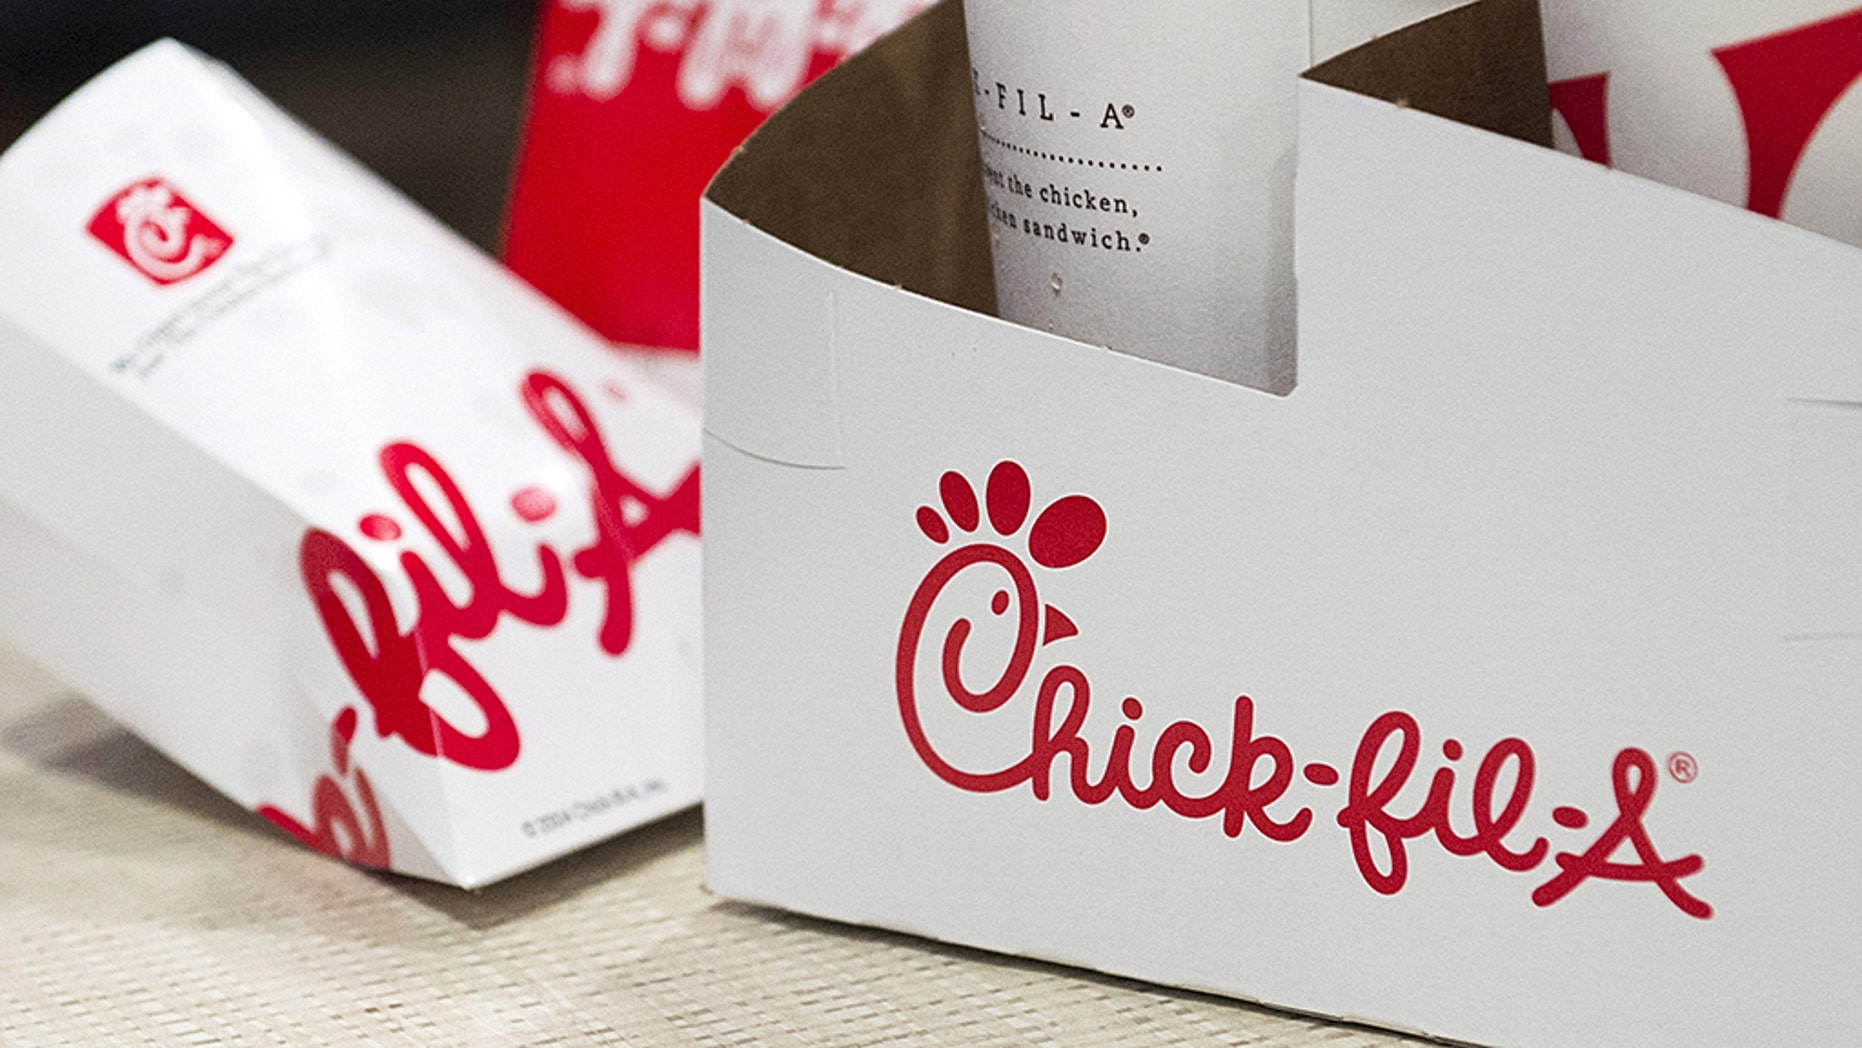 Chick-fil-A has the best customer service in America, survey claims